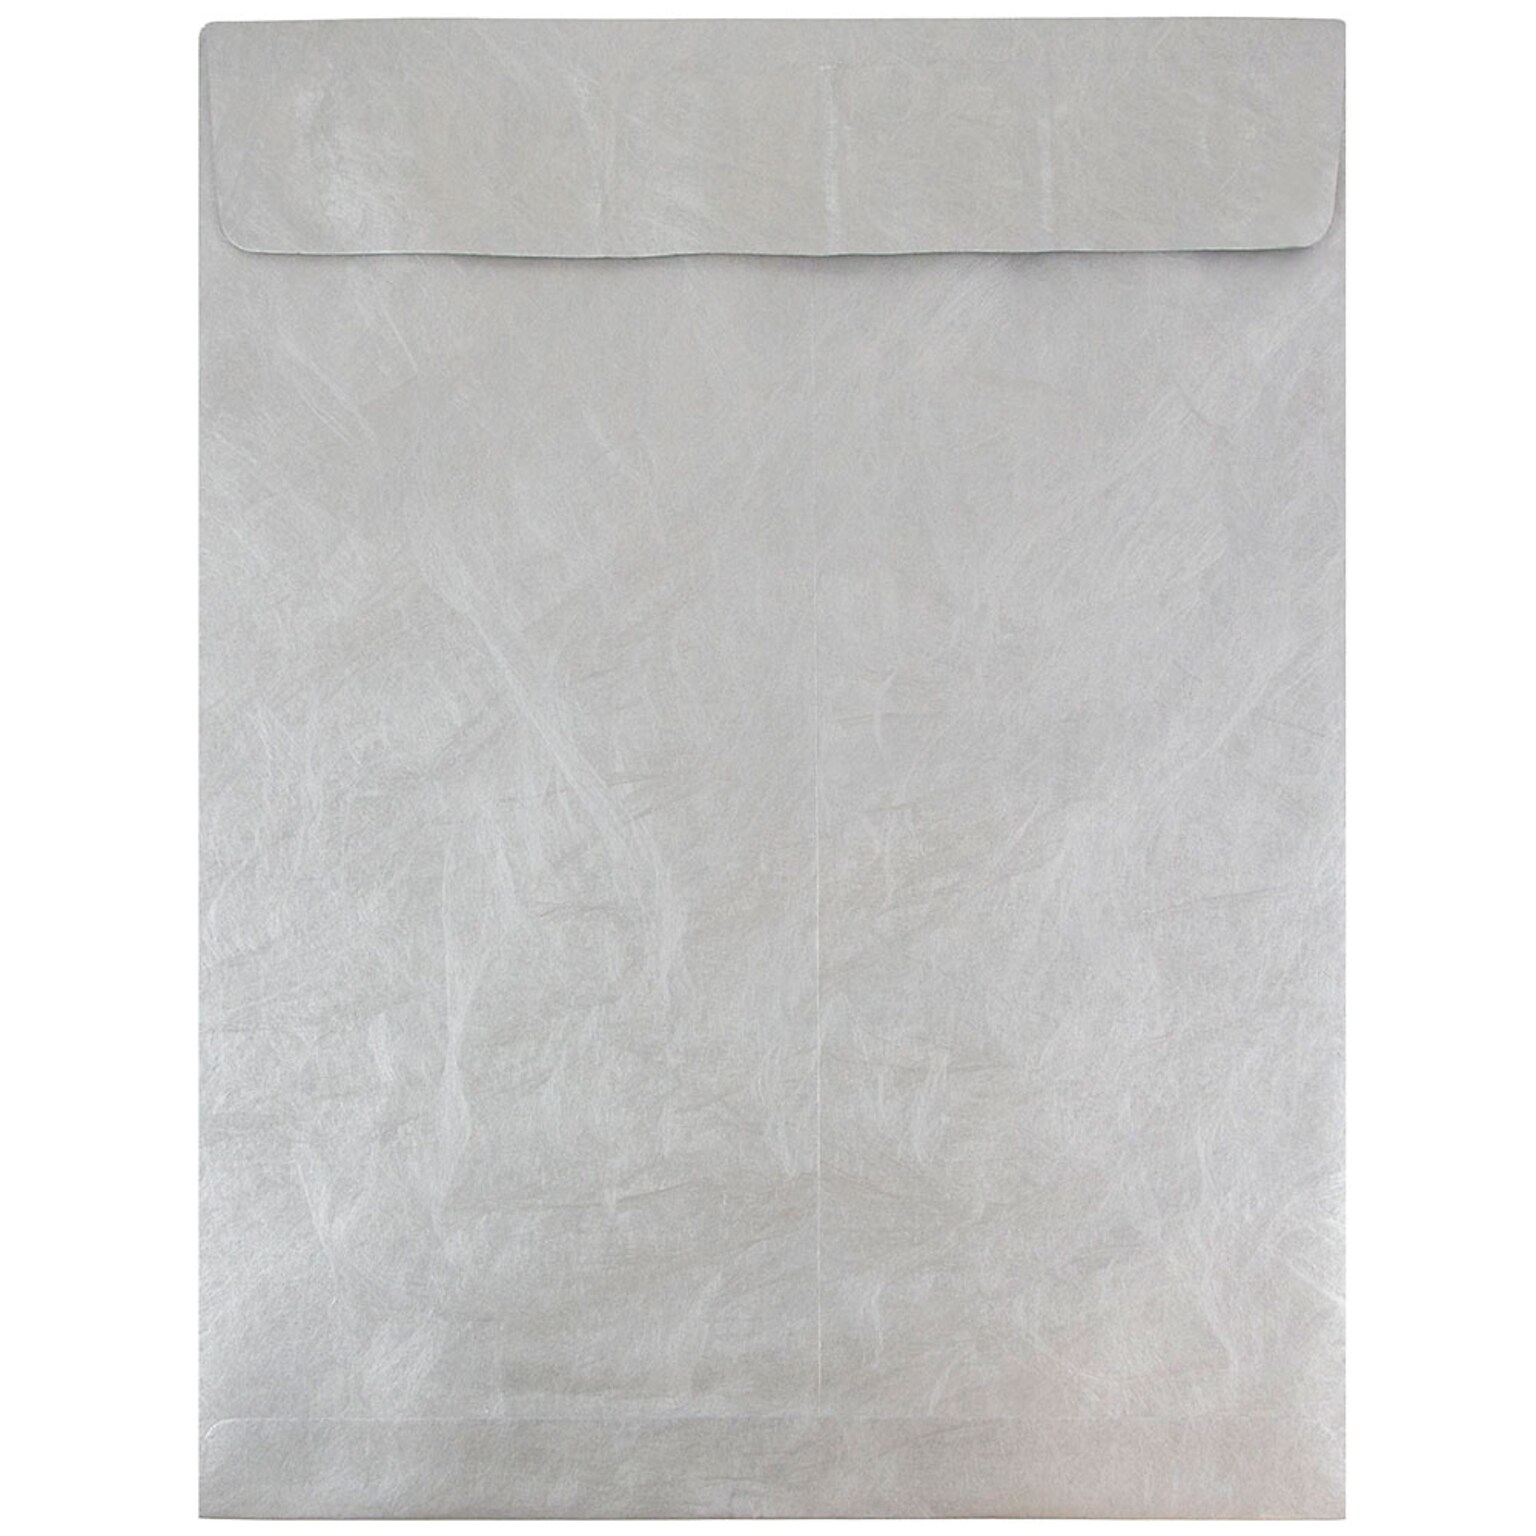 JAM Paper Open End Catalog Envelope, with Peel & Seal Closure, 11 1/2 x 14 1/2, Silver, 25/Pack (V021387)